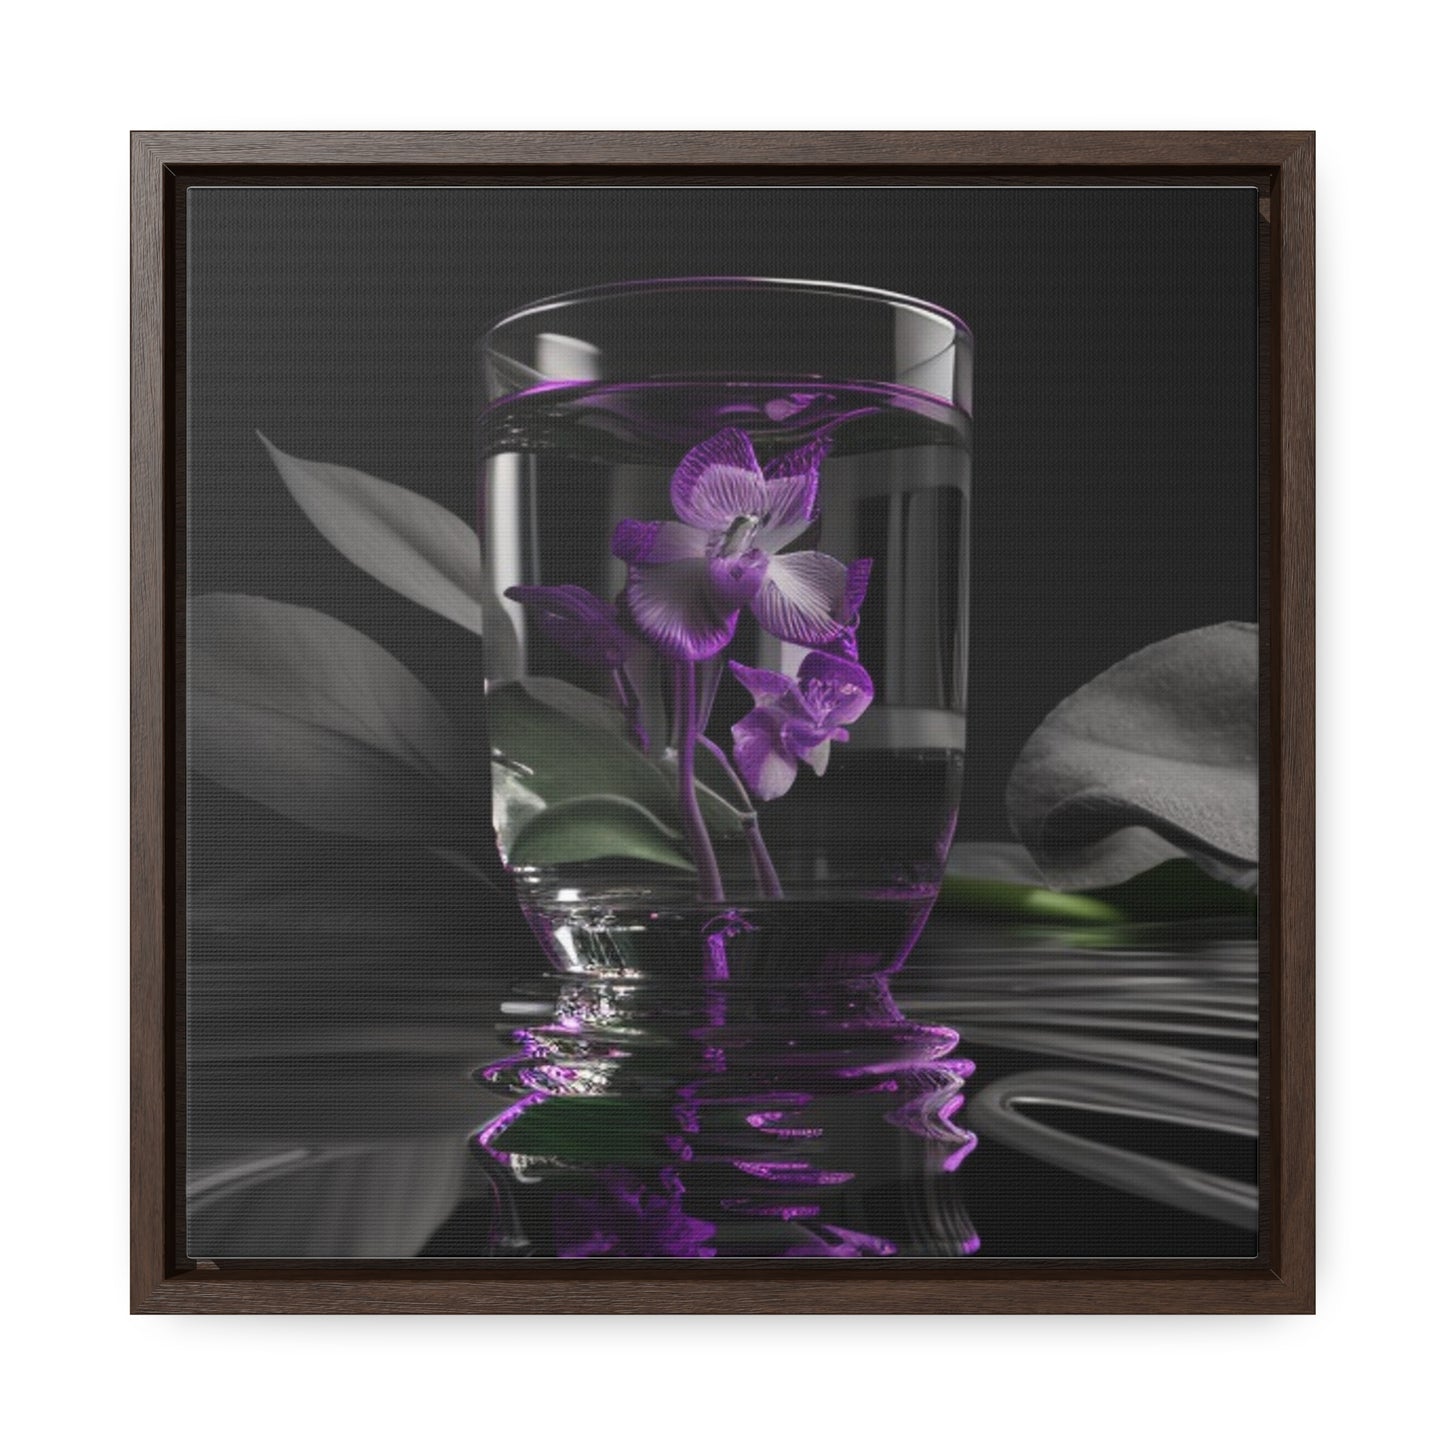 Gallery Canvas Wraps, Square Frame Purple Orchid Glass vase 1